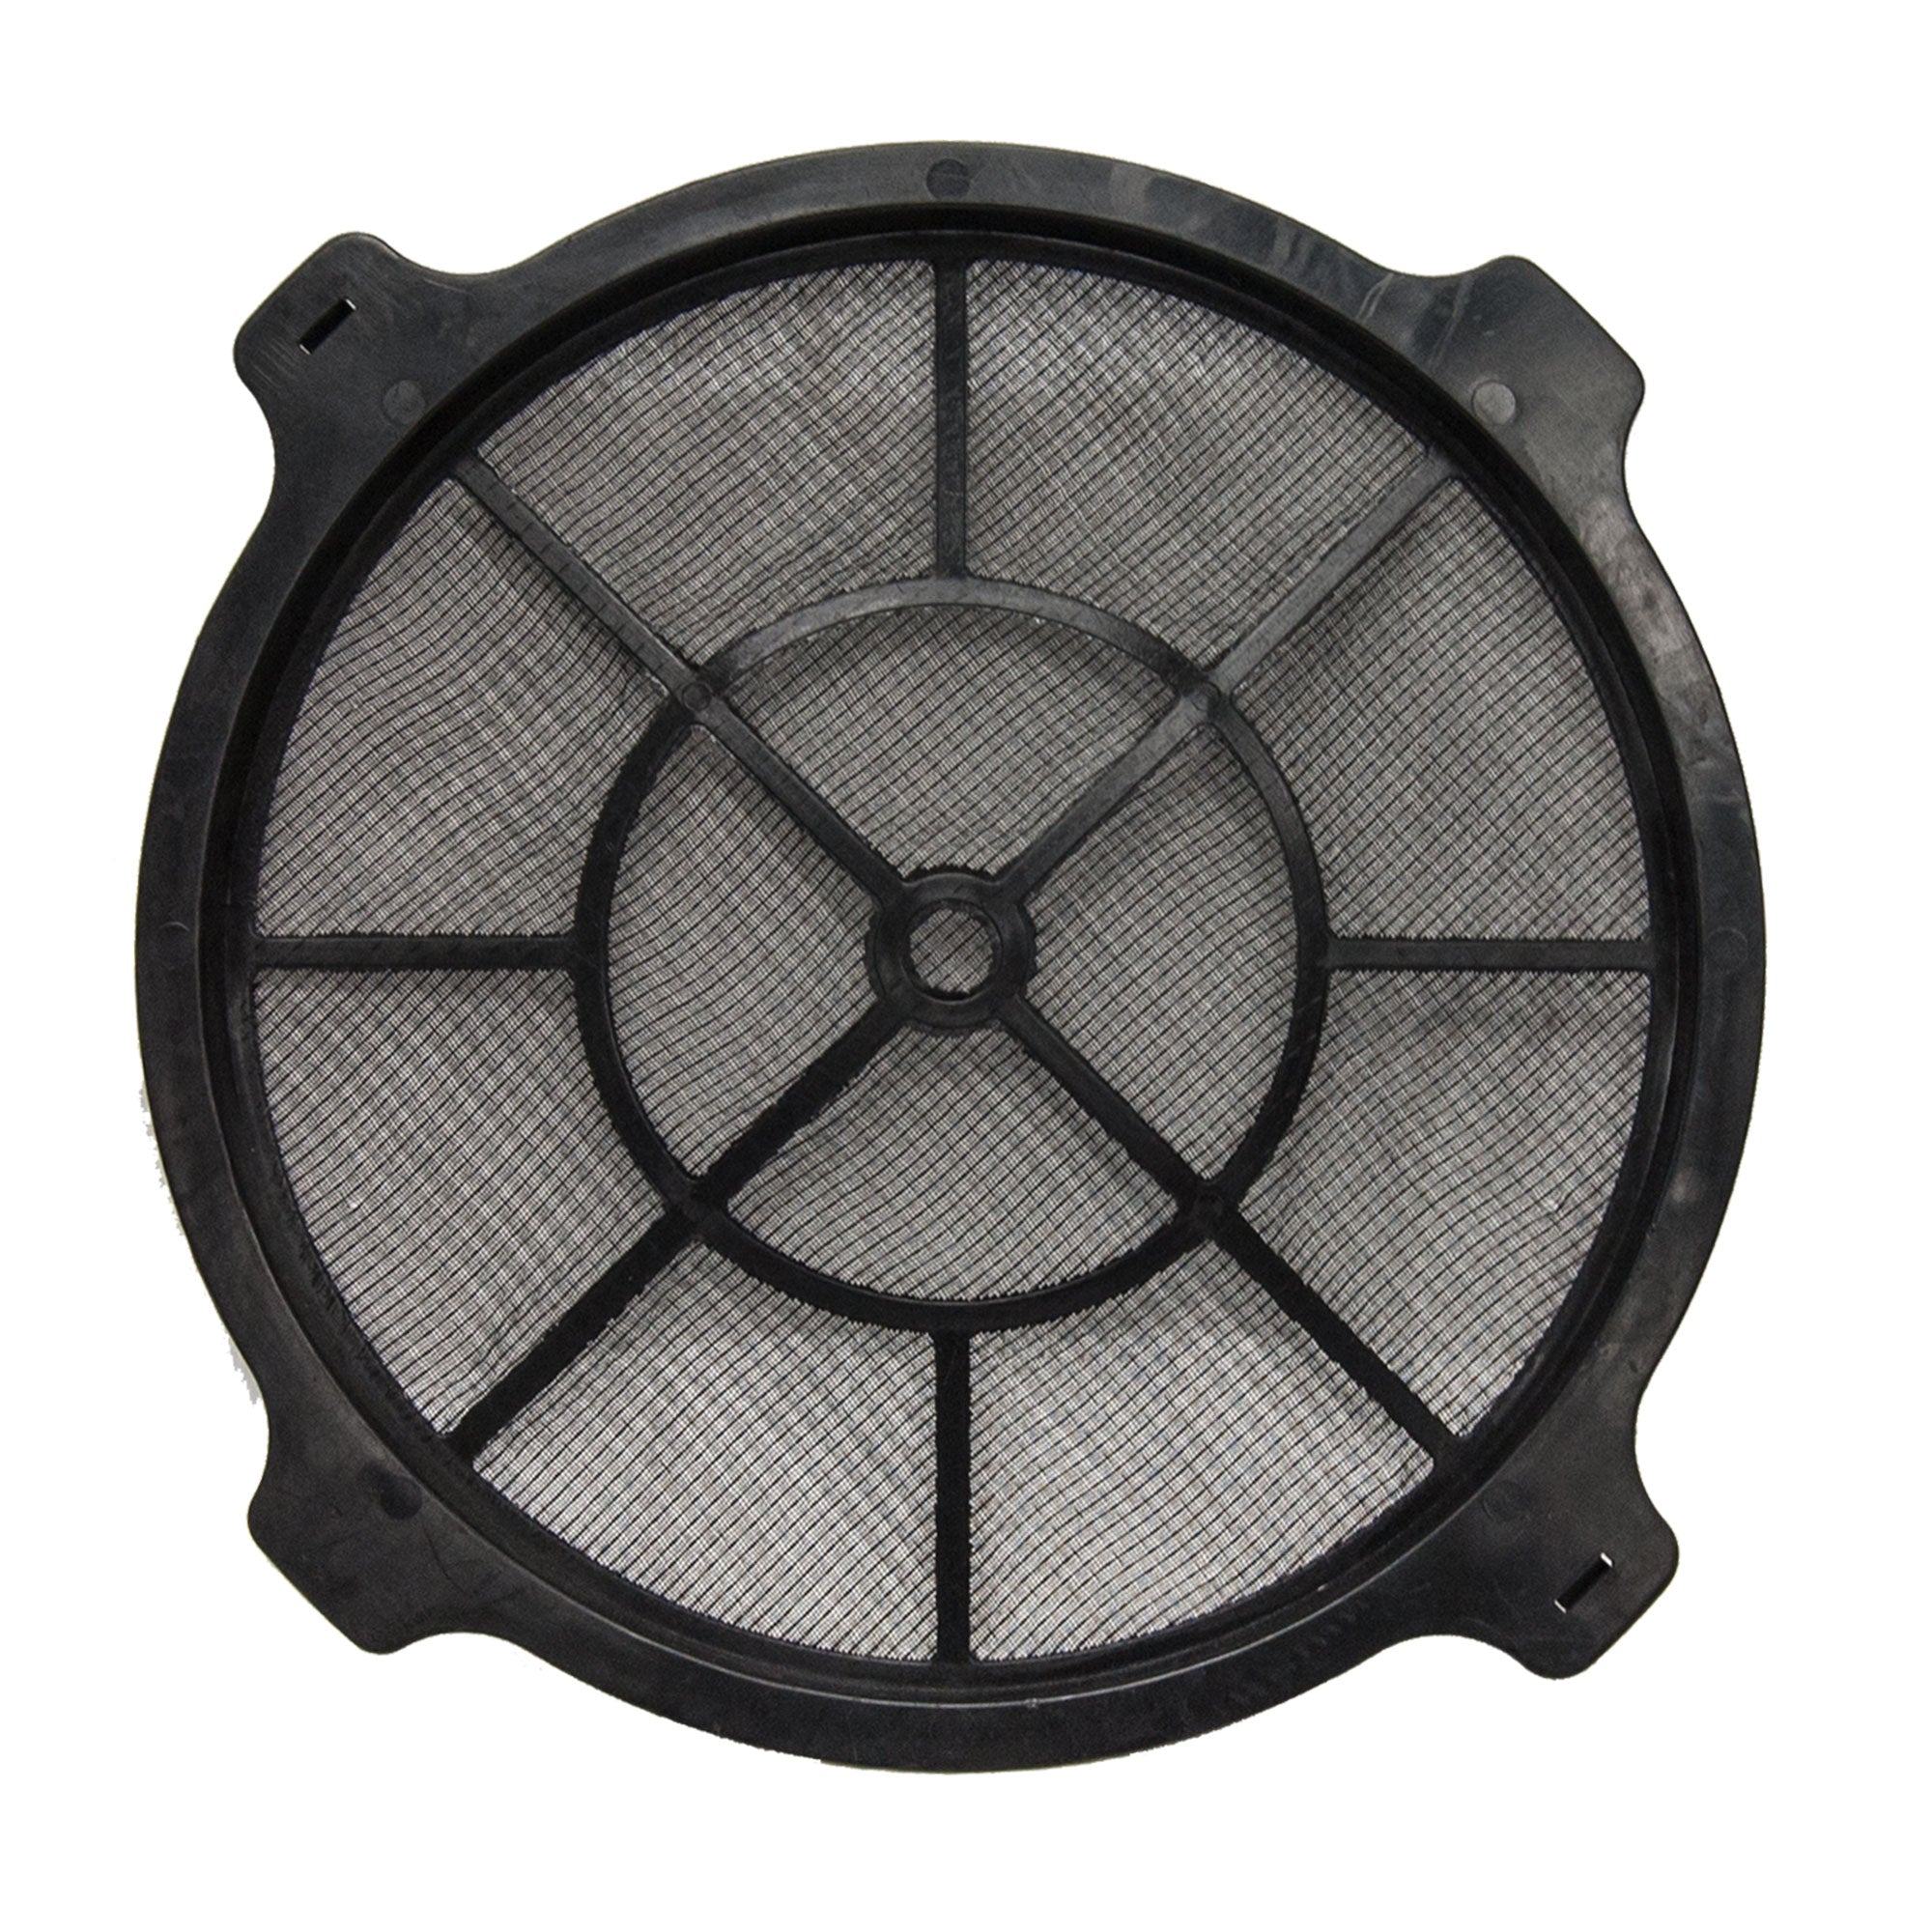 XPOWER Washable Outer Nylon Mesh Filter